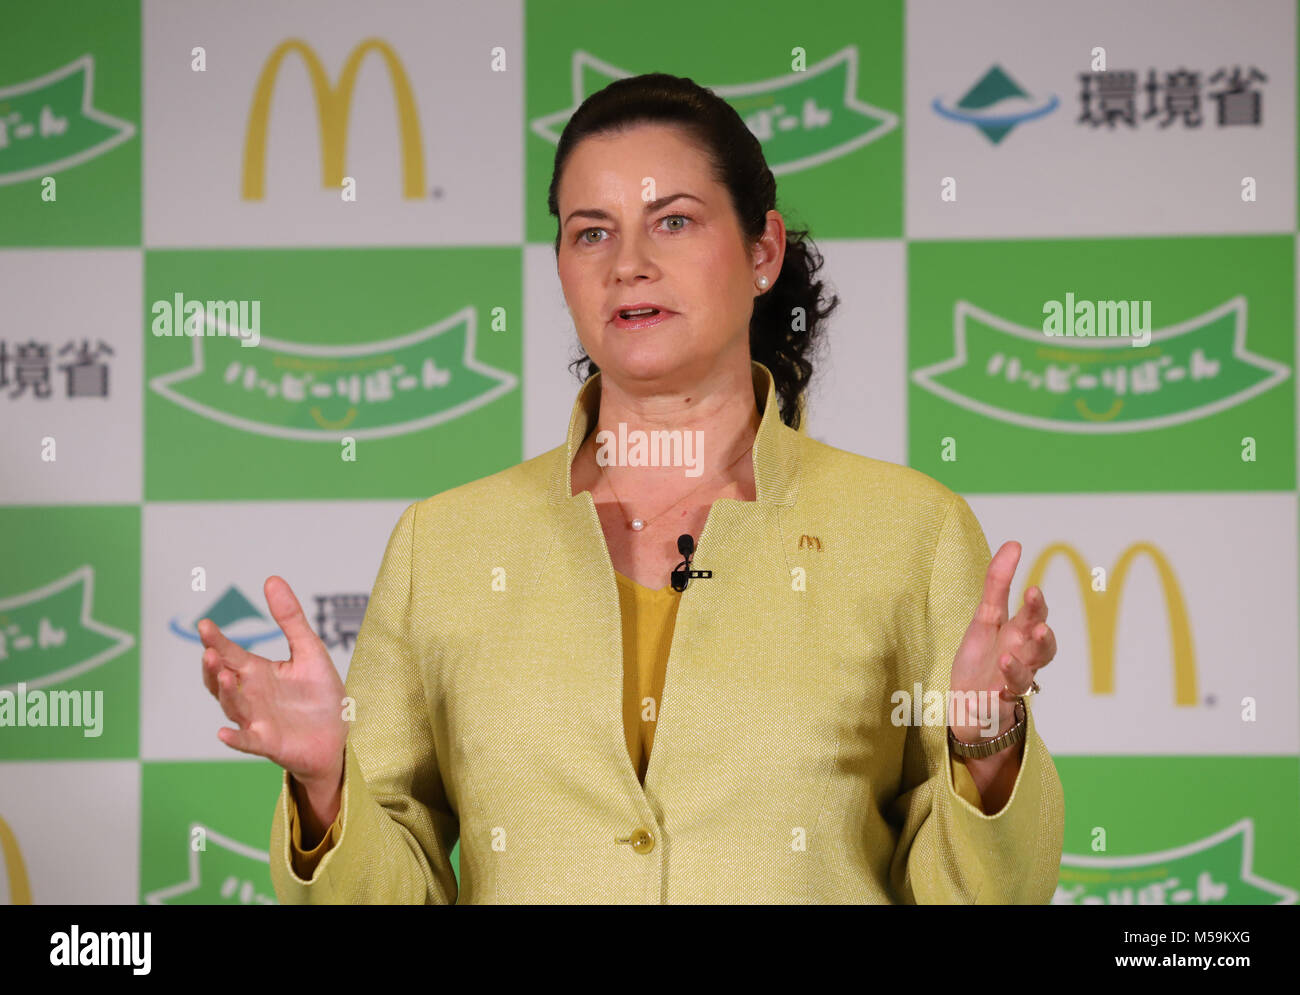 Tokyo, Japan. 21st Feb, 2018. McDonald's Japan president Sarah Casanova announces a joint project of plastic toy recycling with Japan's Environment Ministry 'Happy Reborn' in Tokyo on Wednesday, February 21, 2018. McDonald's Japan restaurant chain will start a campaign to collect 1 million plastic toys at their restaurants for recycling to make plastic trays from February 23 through May 6. Credit: Yoshio Tsunoda/AFLO/Alamy Live News Stock Photo